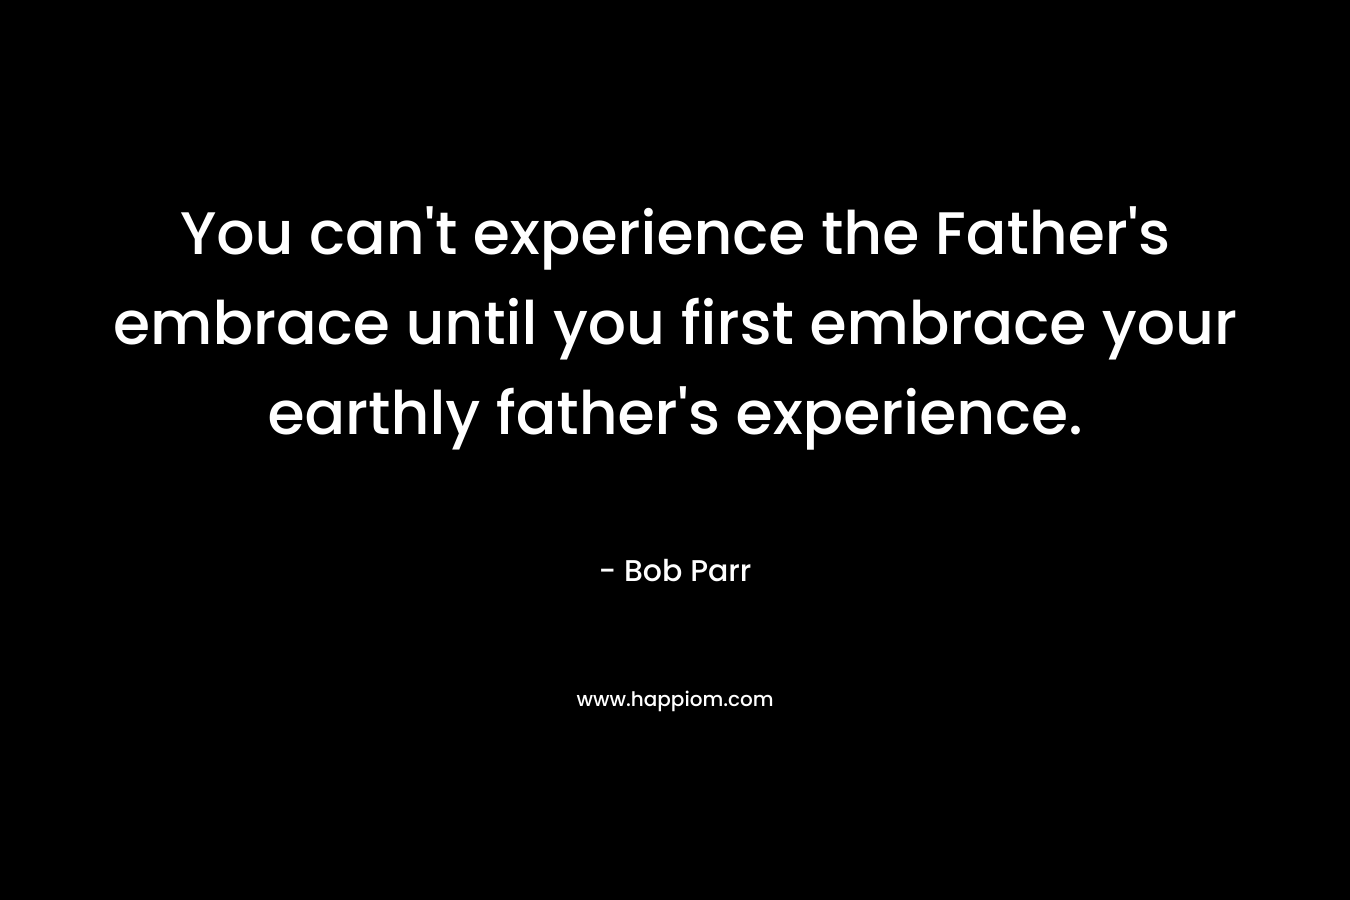 You can't experience the Father's embrace until you first embrace your earthly father's experience.